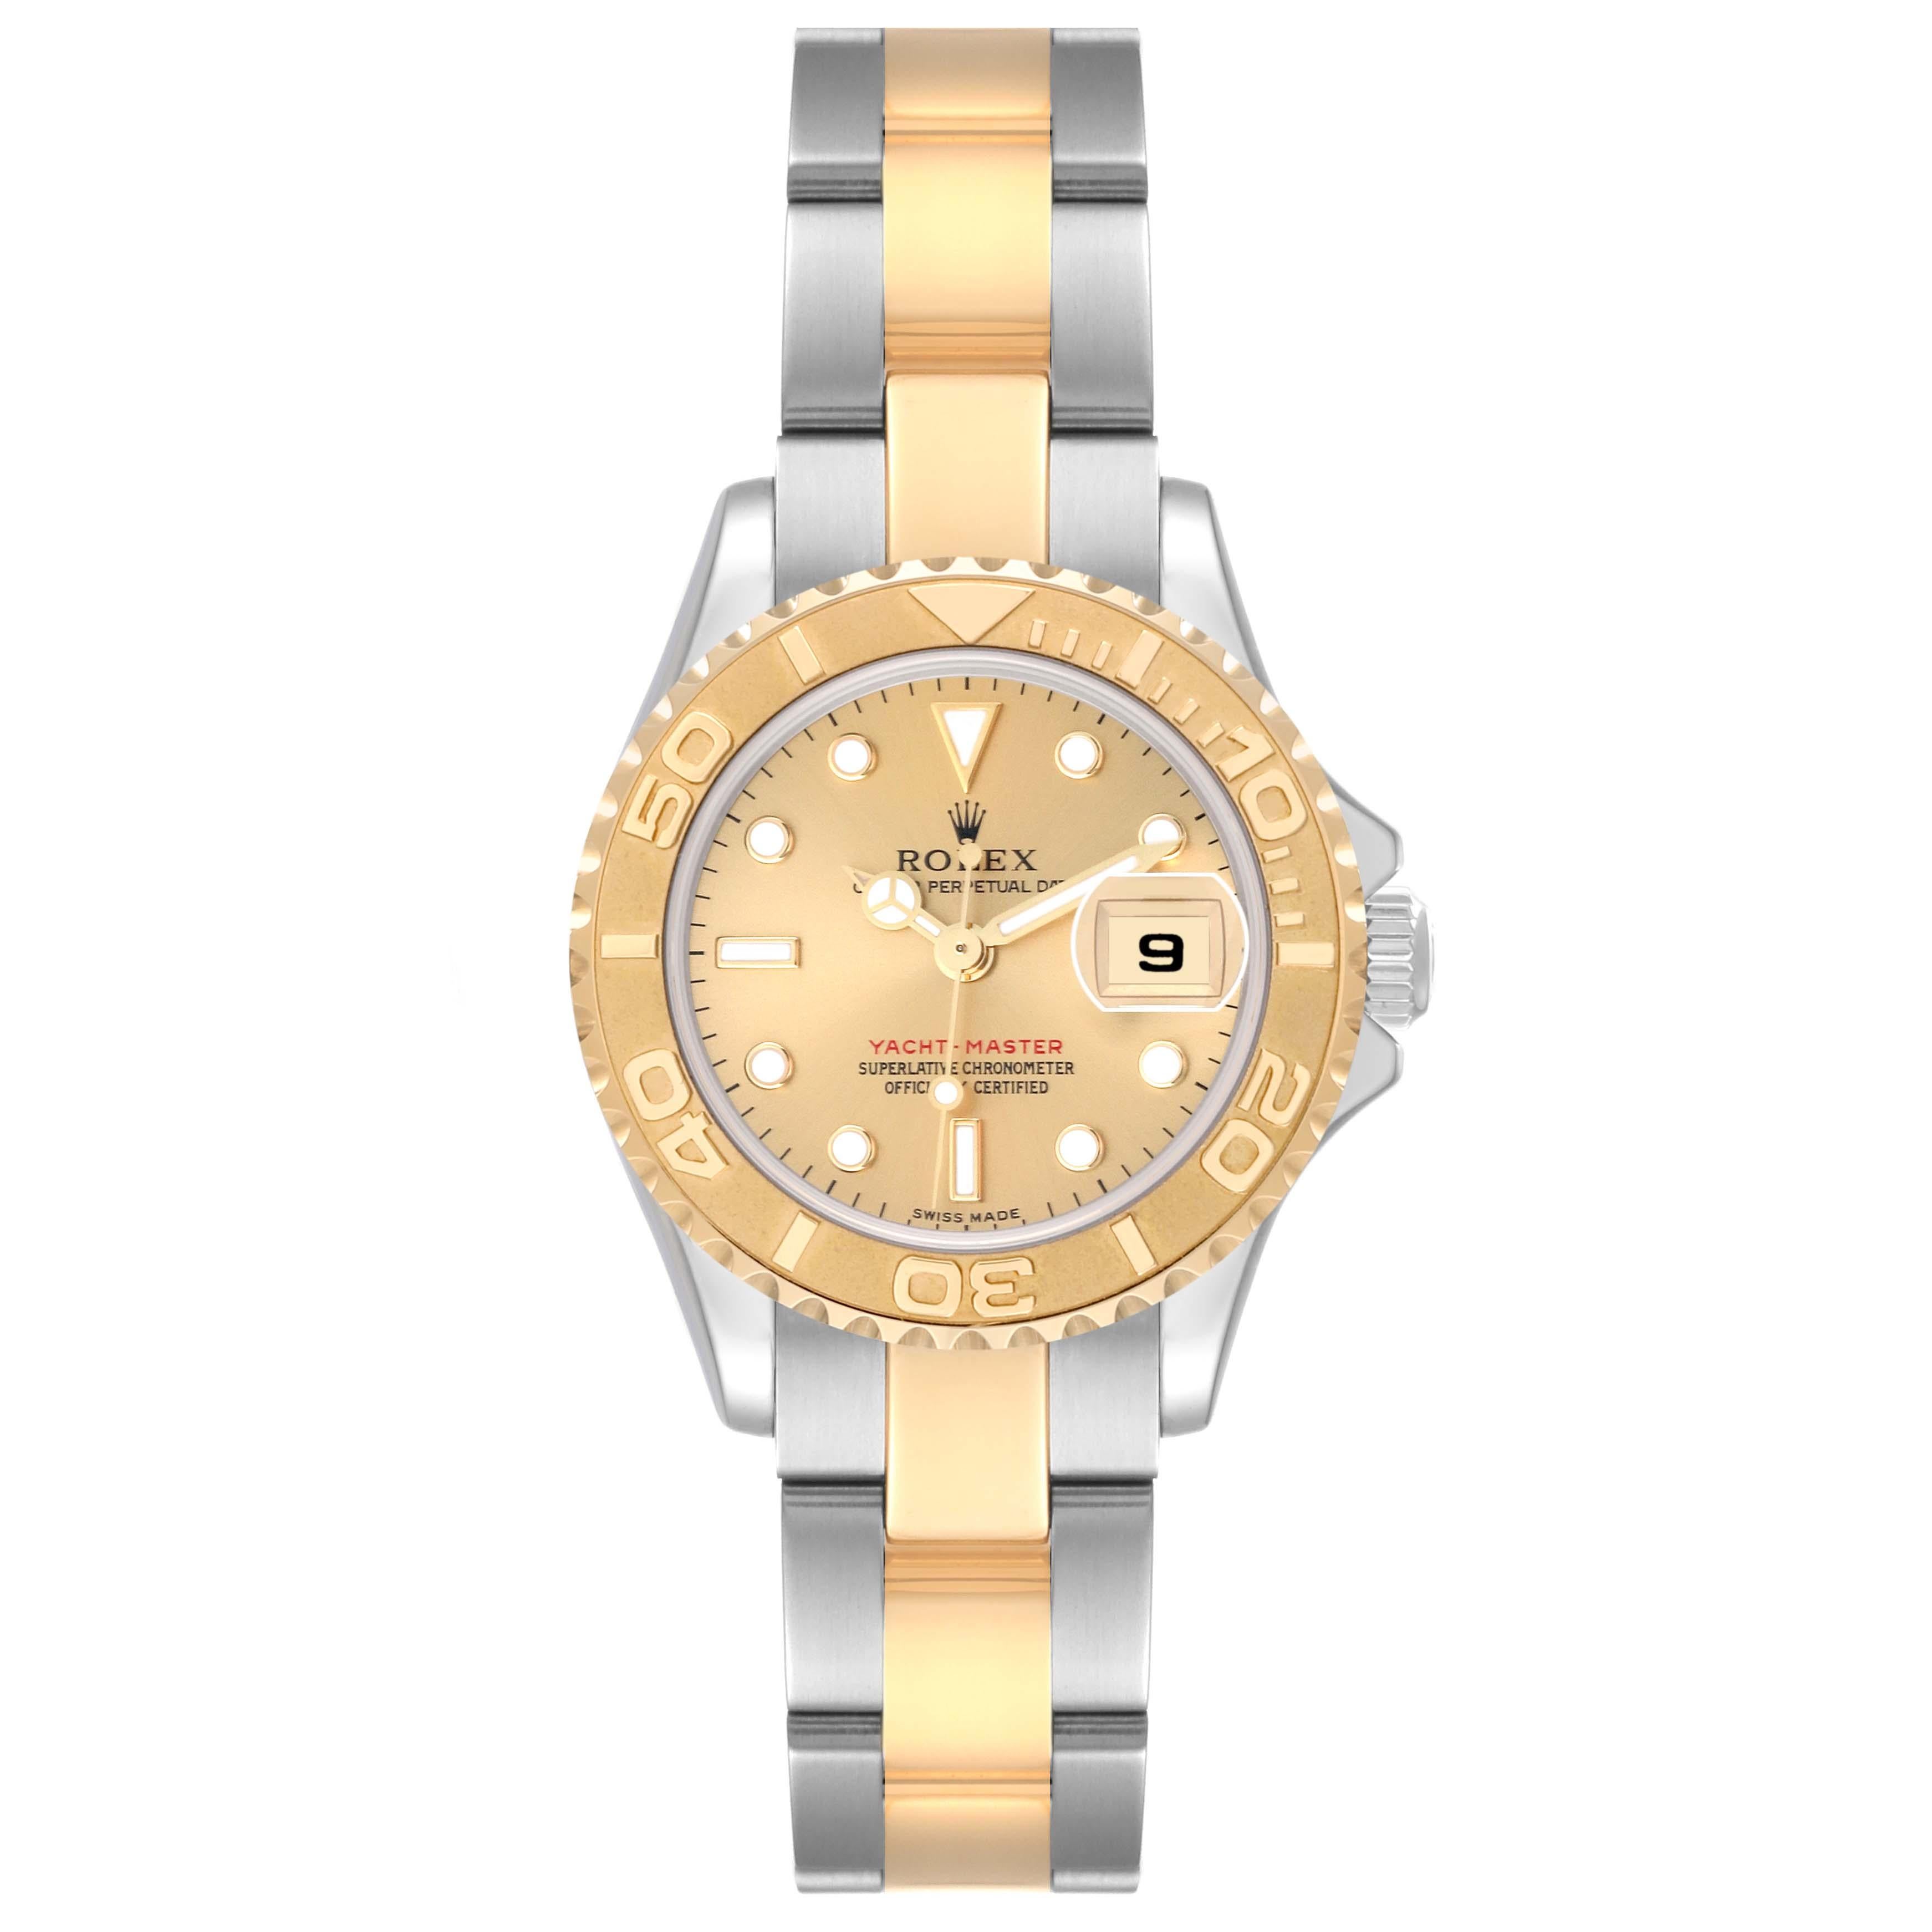 Rolex Yachtmaster 29 Steel Yellow Gold Champagne Dial Ladies Watch 169623. Officially certified chronometer automatic self-winding movement. Stainless steel and 18k yellow gold case 29 mm in diameter. Rolex logo on a crown. 18k yellow gold special